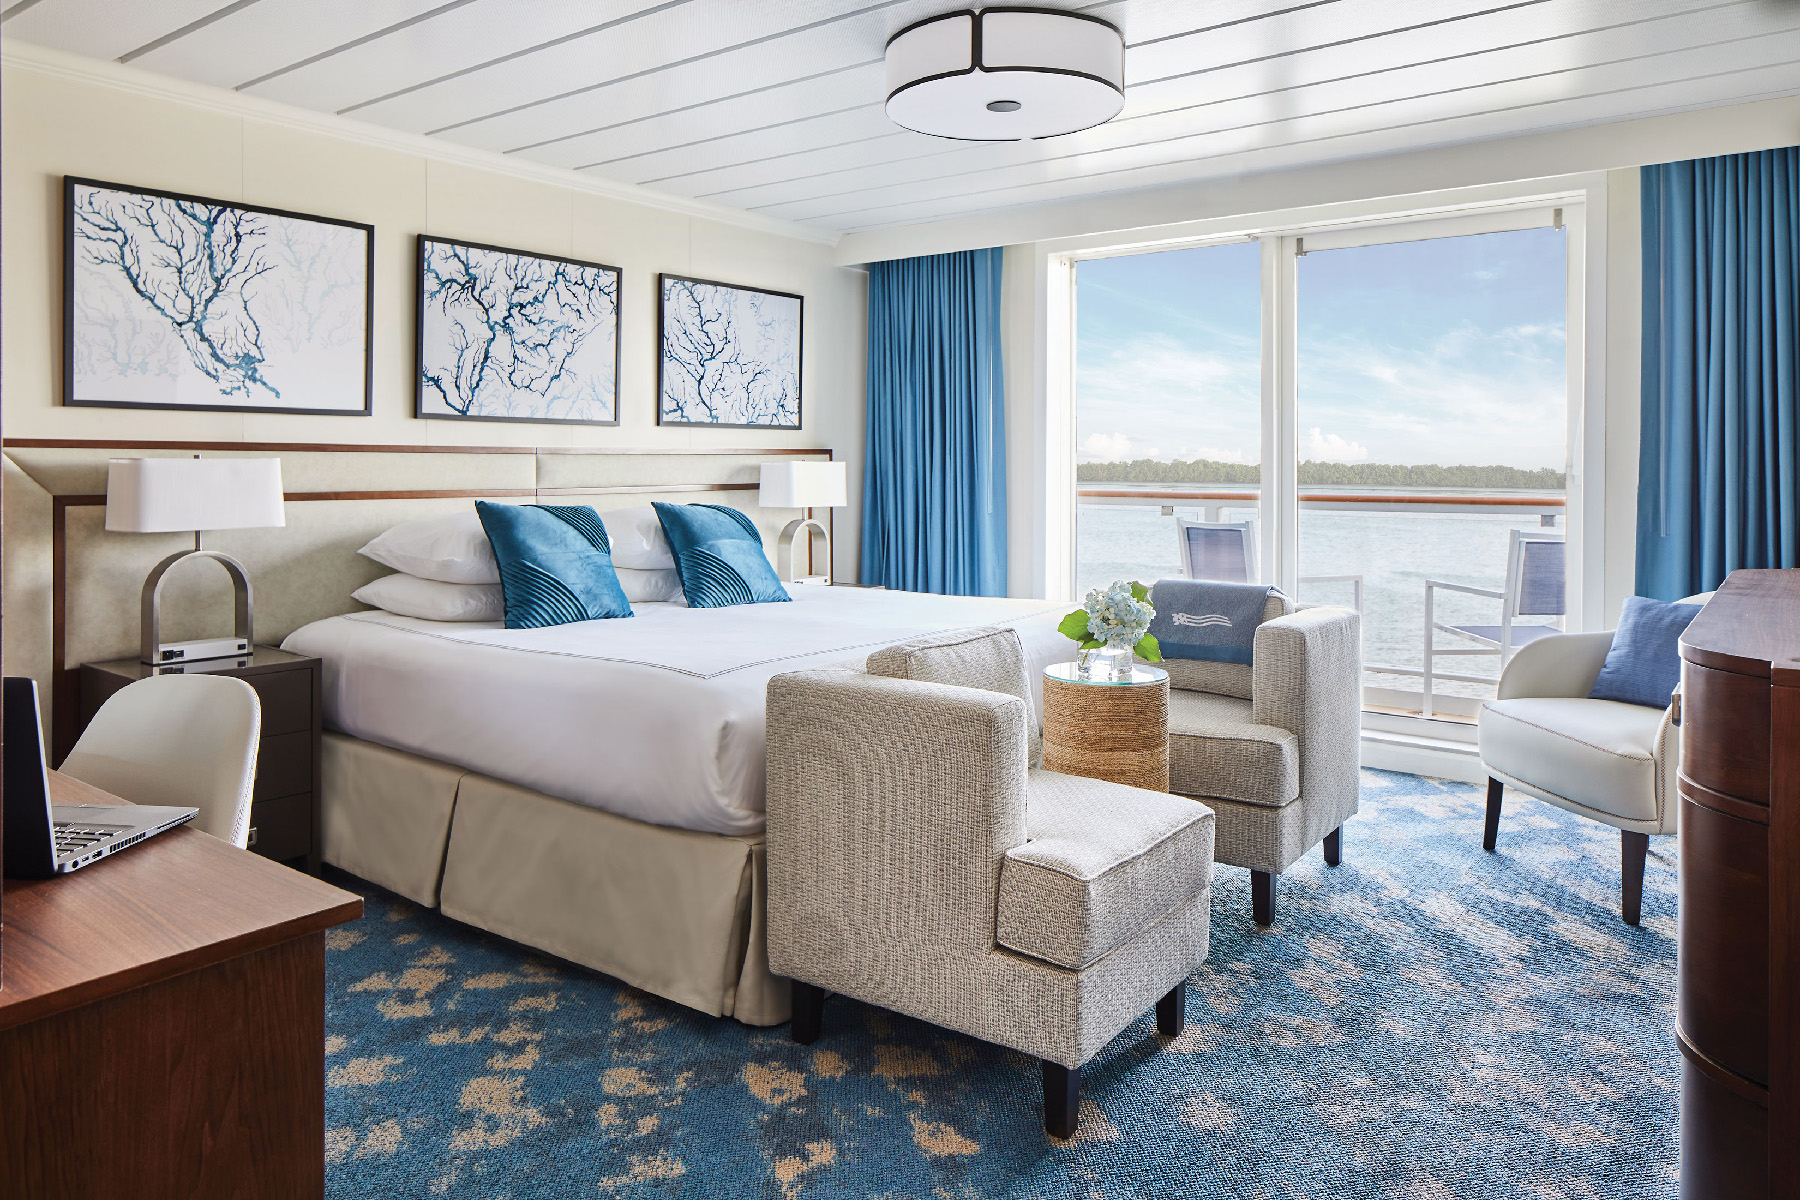 A comfortable stateroom on the American Symphony